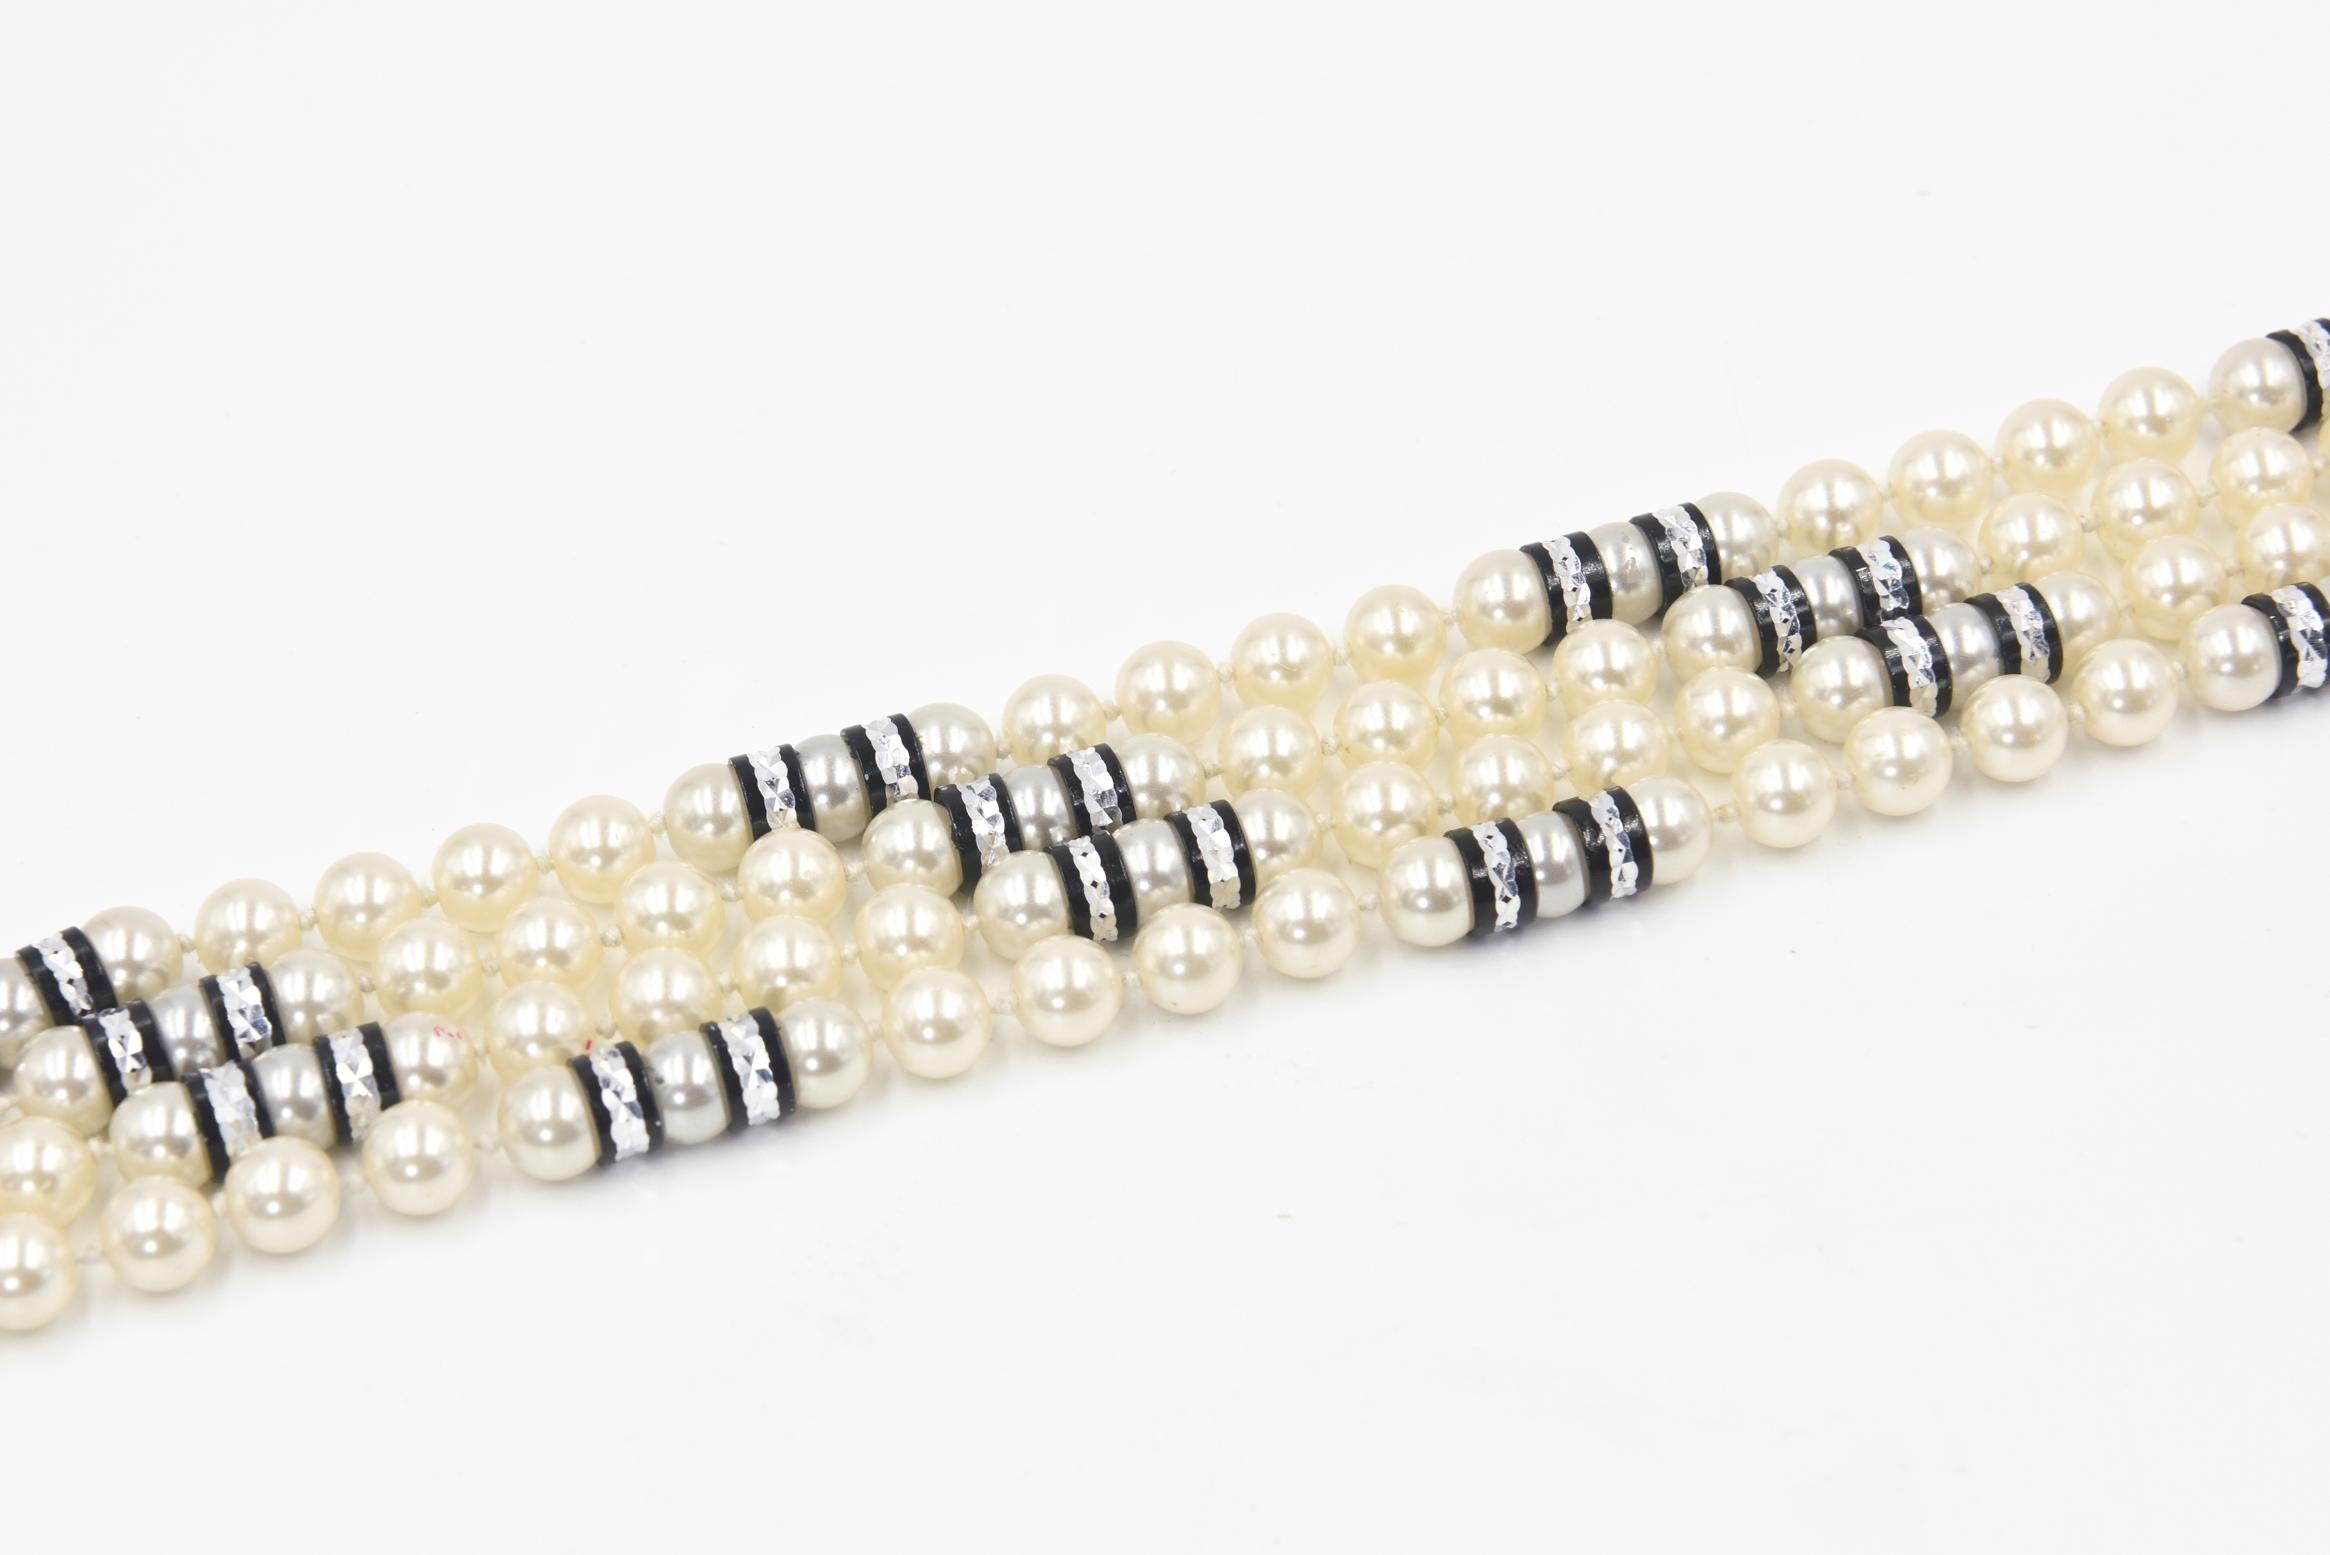 Bead Art Deco Style Long Pearl Necklace with Black Tassels